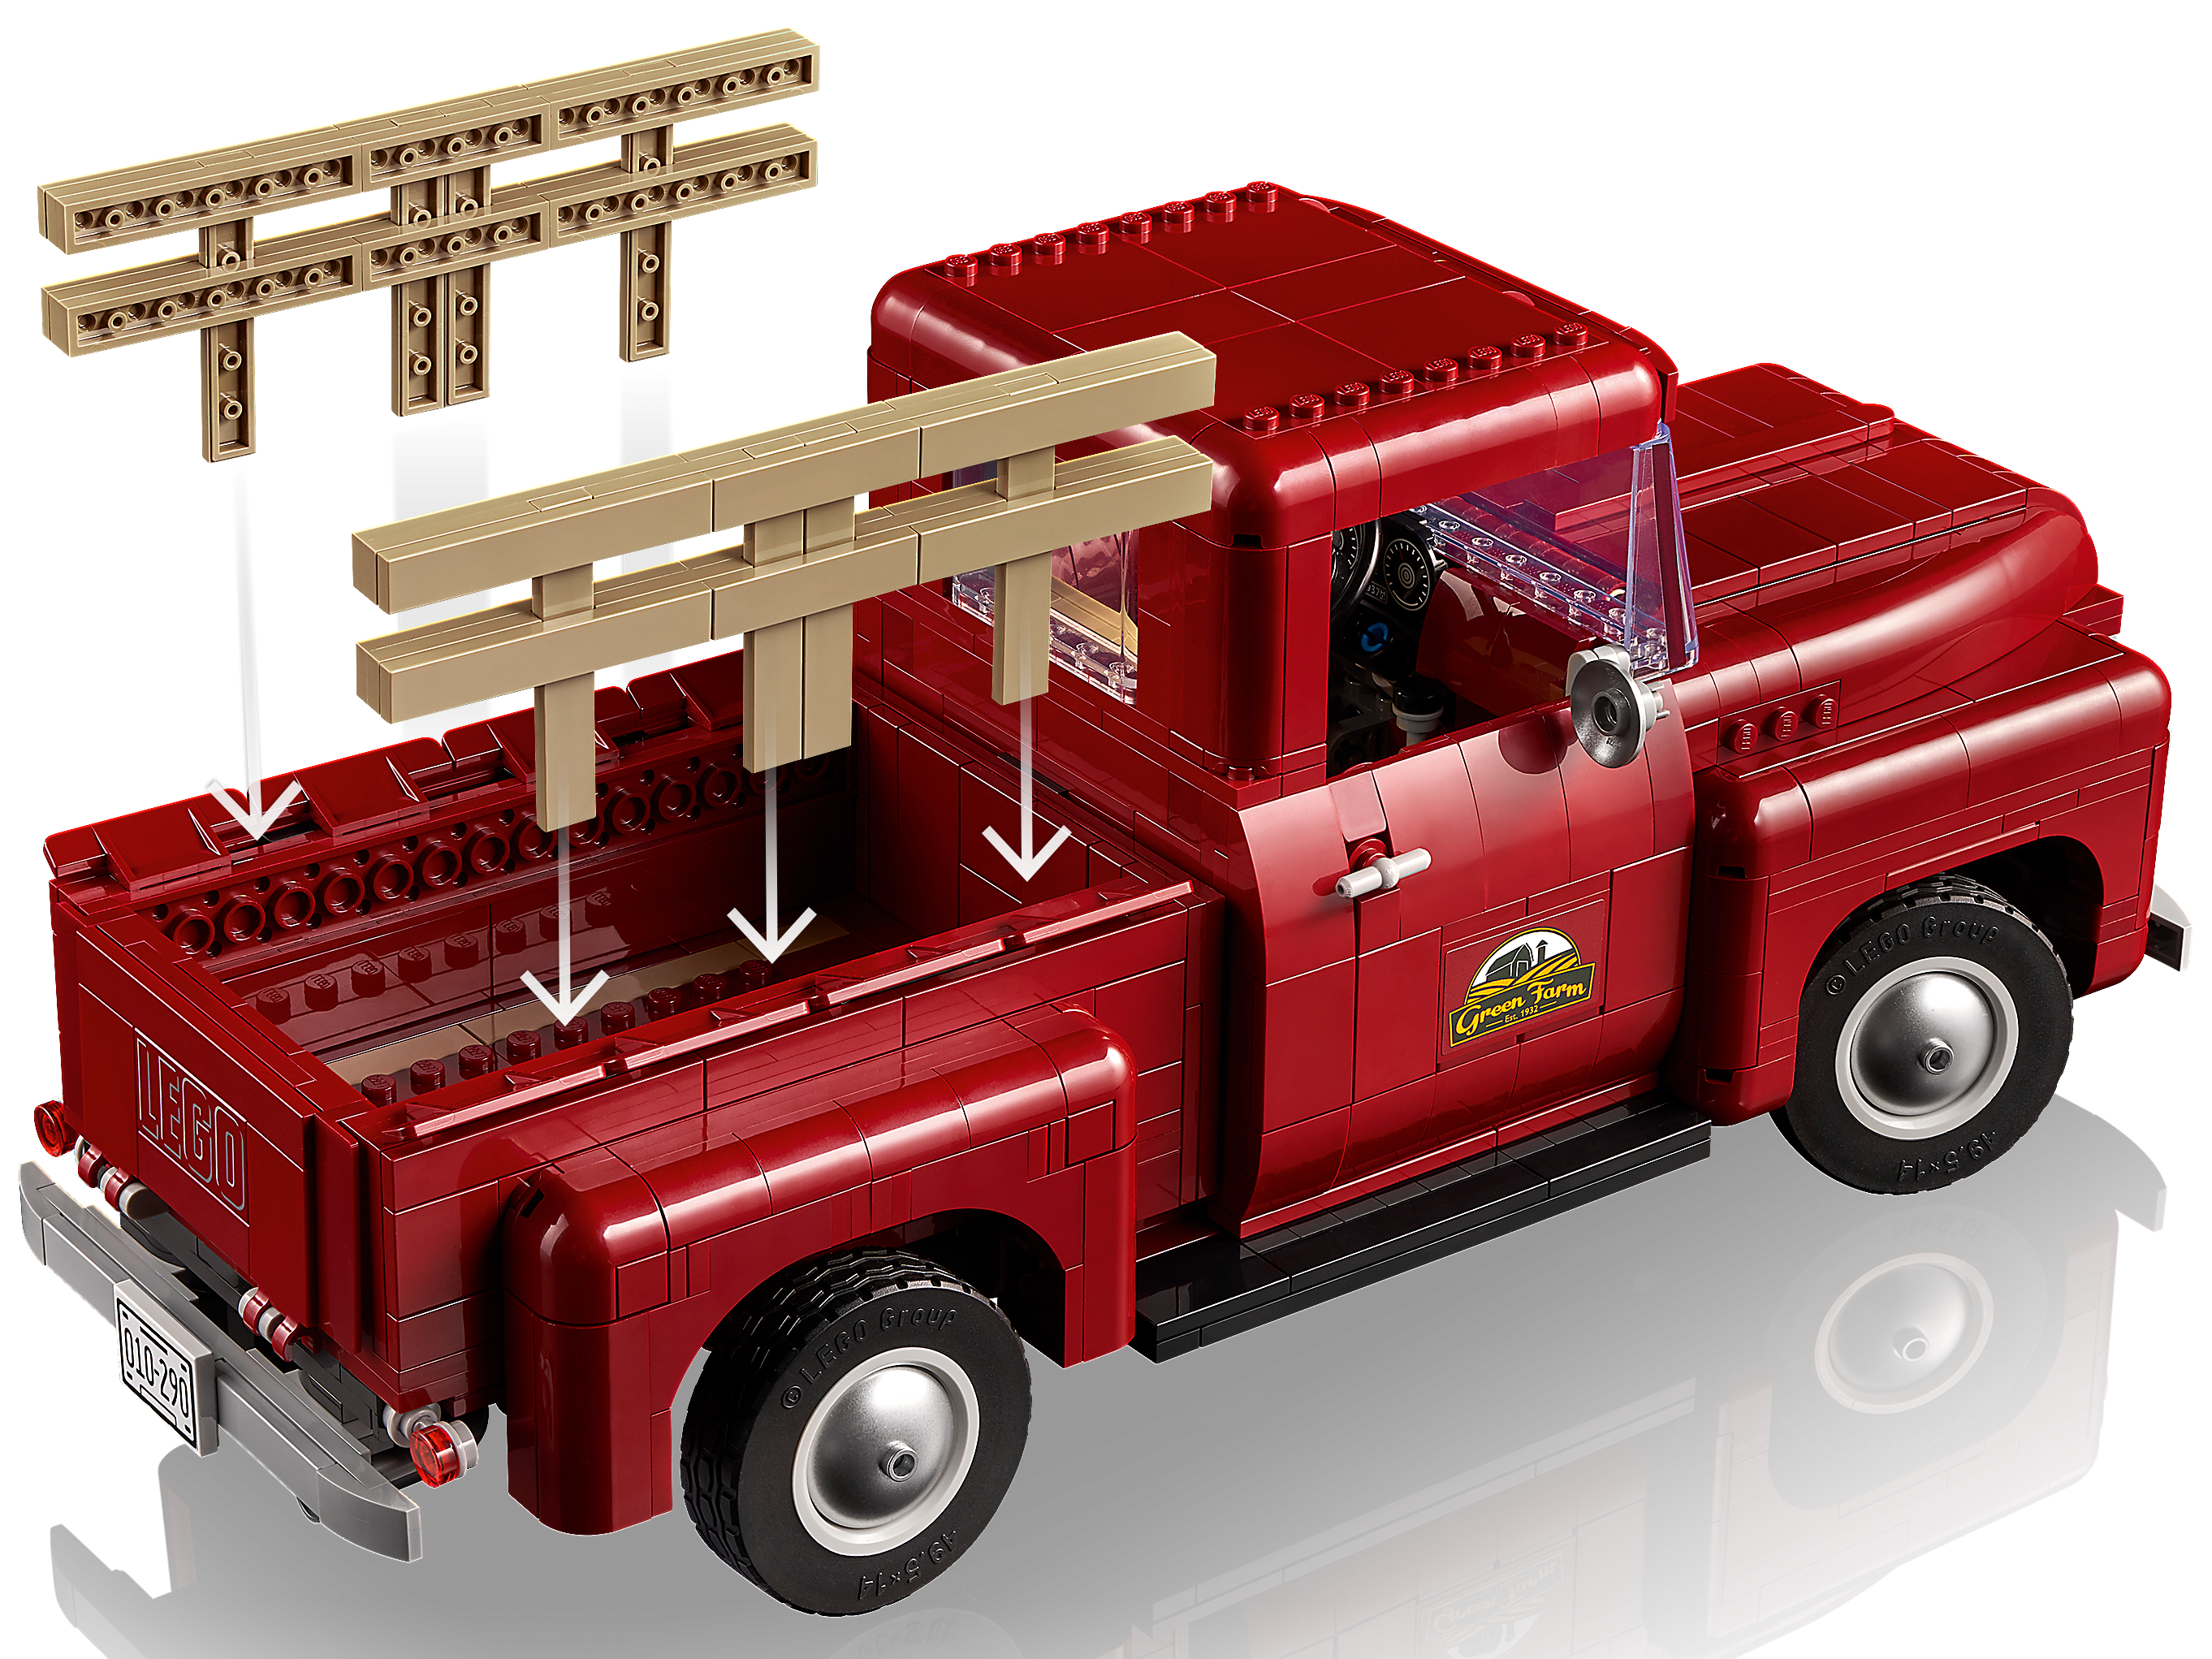 Pickup Truck 10290 | LEGO® Icons | Buy online at the Official LEGO